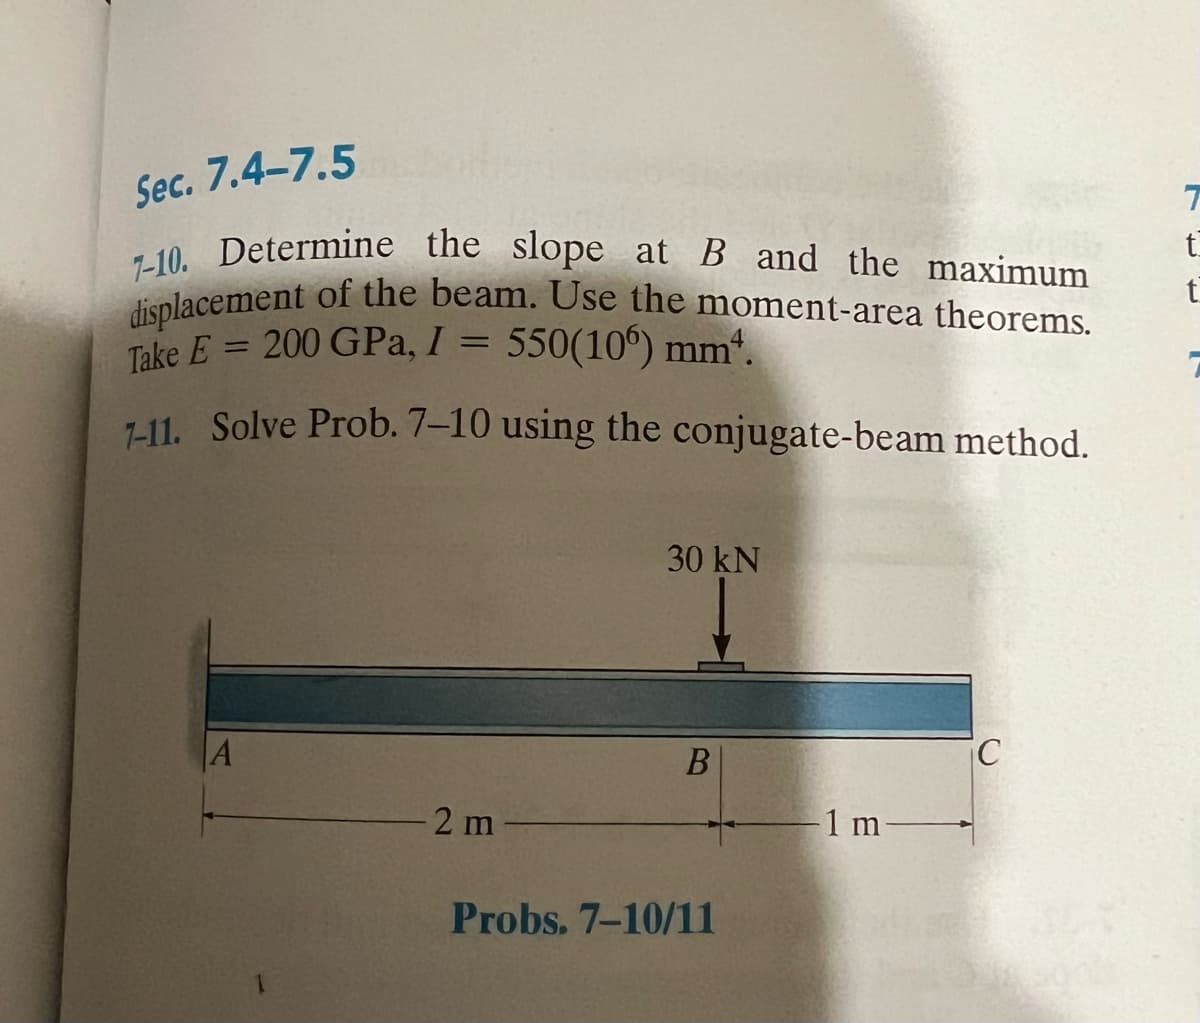 Sec. 7.4-7.5
7-10. Determine the slope at B and the maximum
displacement of the beam. Use the moment-area theorems.
Take E = 200 GPa, I = 550(106) mm¹.
7-11. Solve Prob. 7-10 using the conjugate-beam method.
A
2 m
30 kN
B
Probs. 7-10/11
1 m-
C